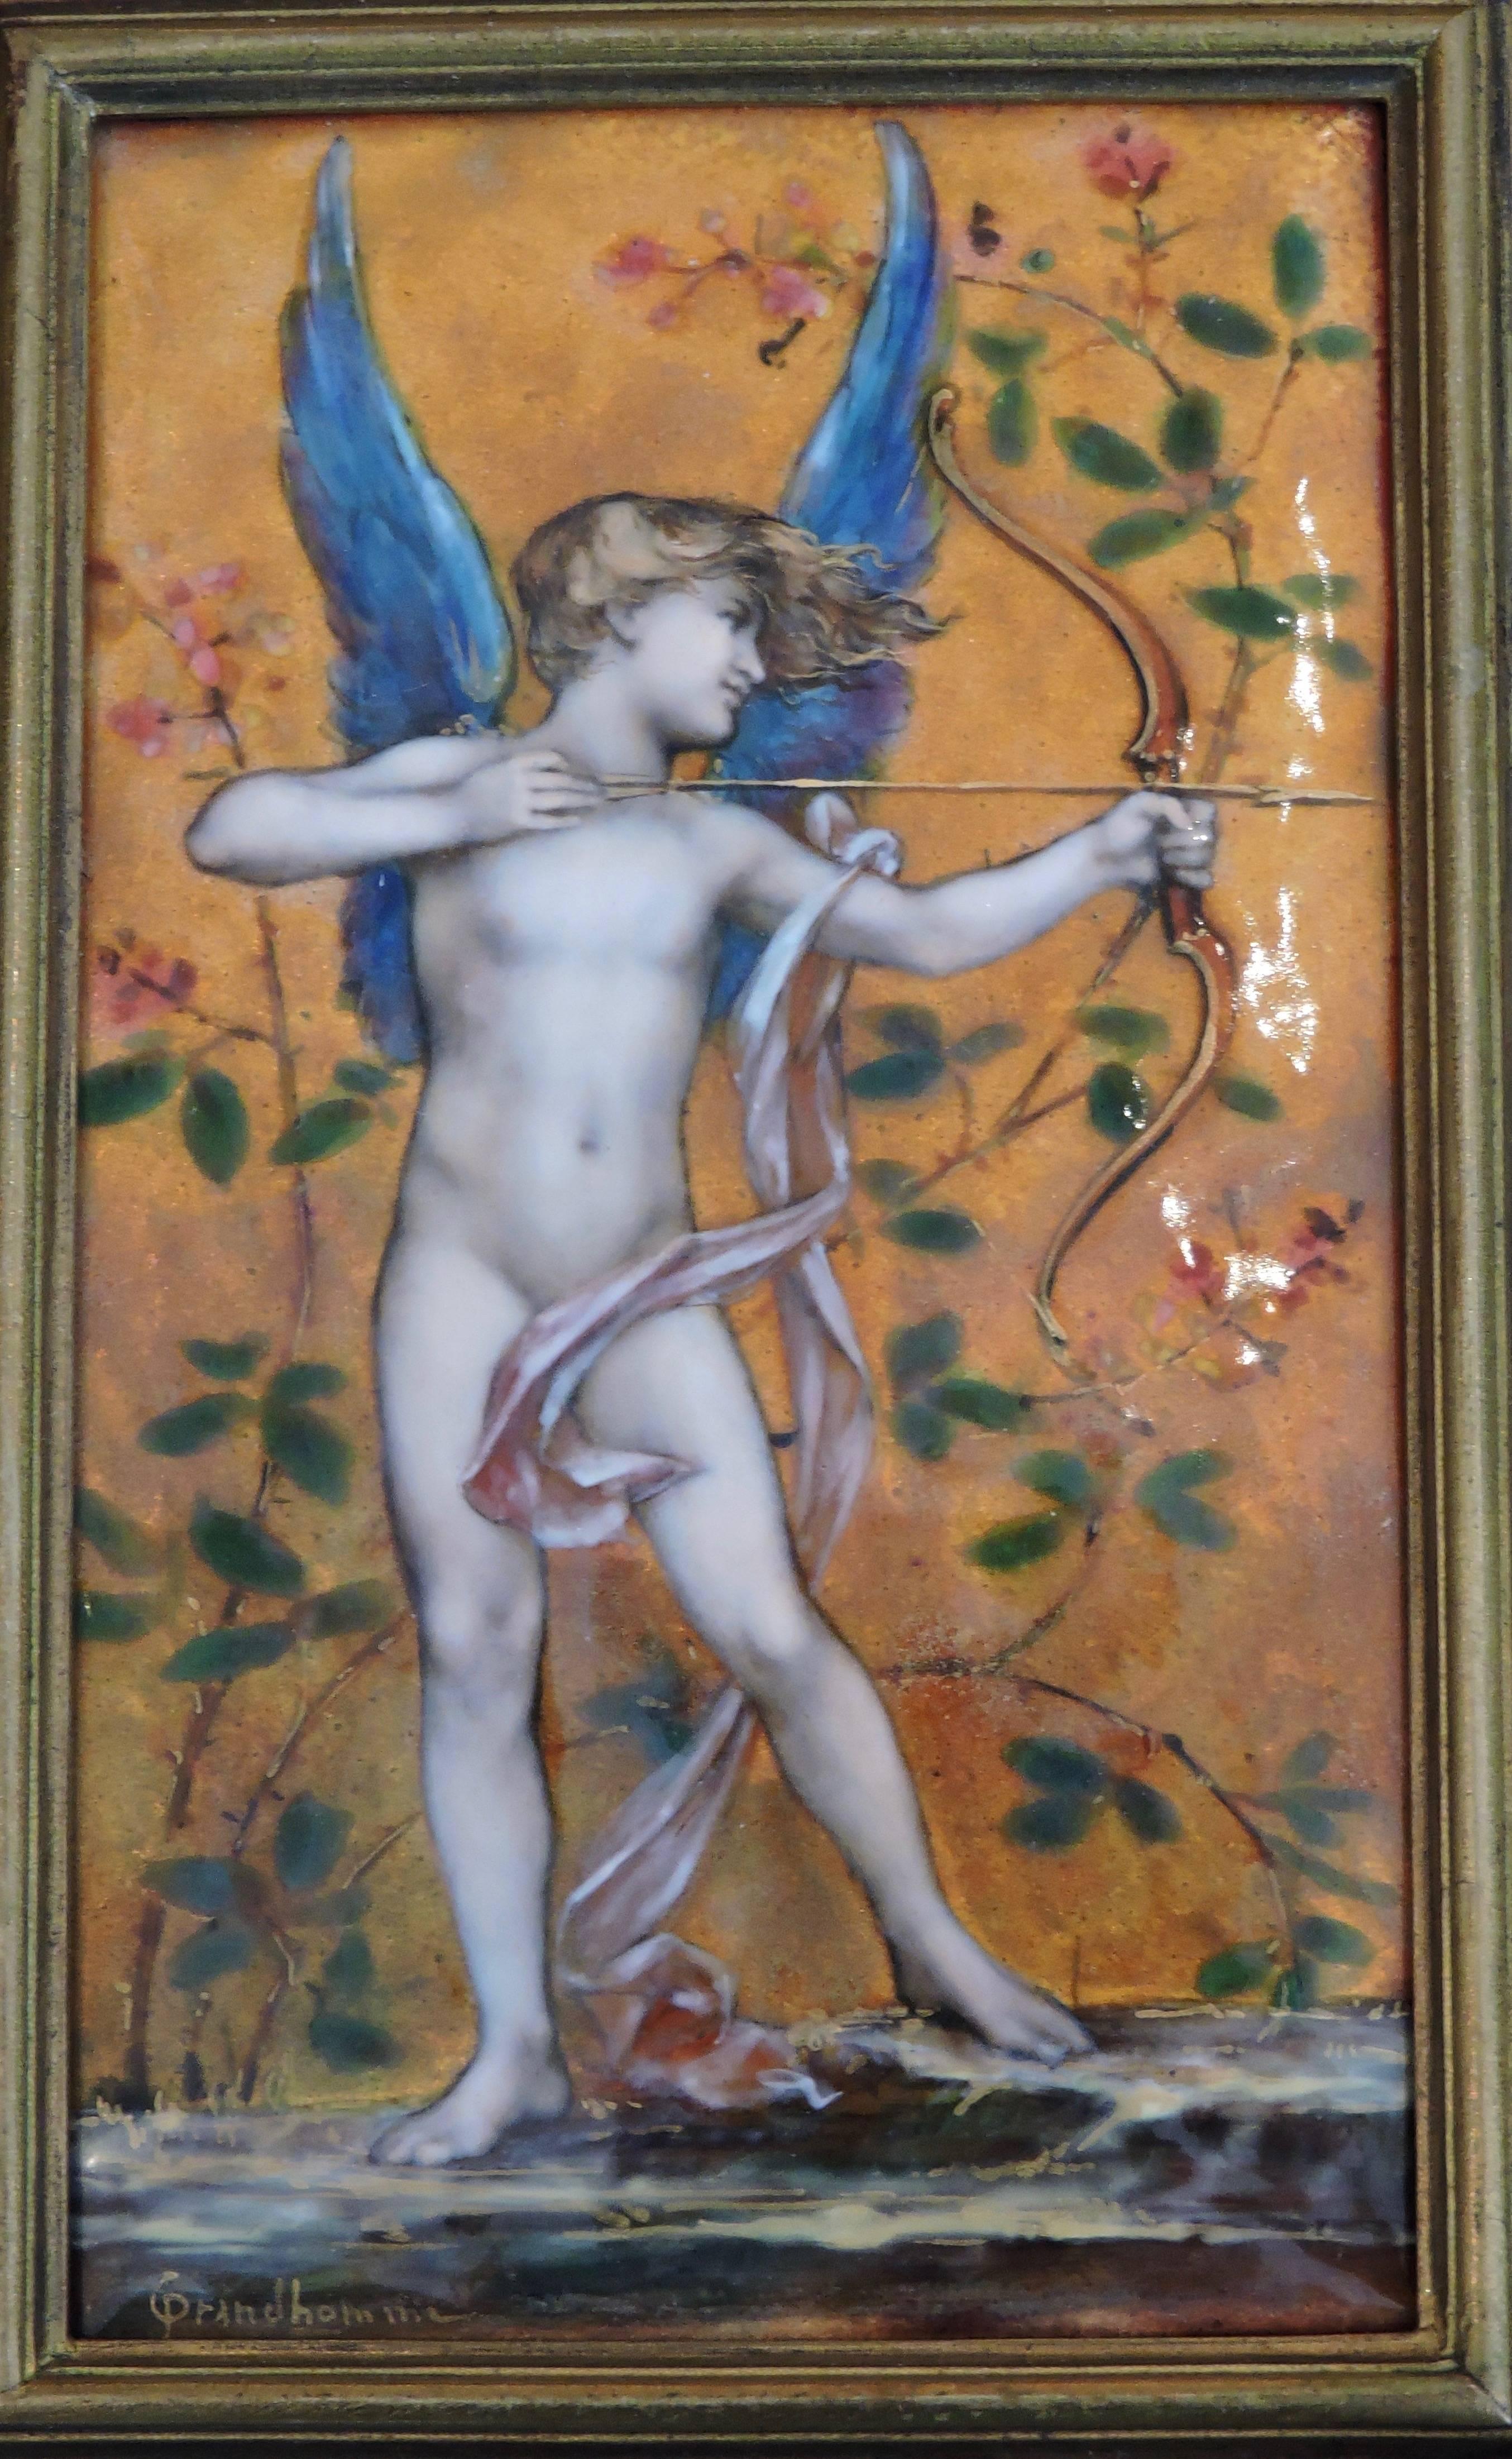 Cupid, an painted enamel copper plaque, gilded and carved wood Frame by Paul Grandhomme circa 1889.
Signed Grandhomme lower left
Plaque: 5.5 x 9.5 cm
Frame: 28 x 34 cm
Paul Grandhomme was trained as an apprentice jeweller when the war with Prussia